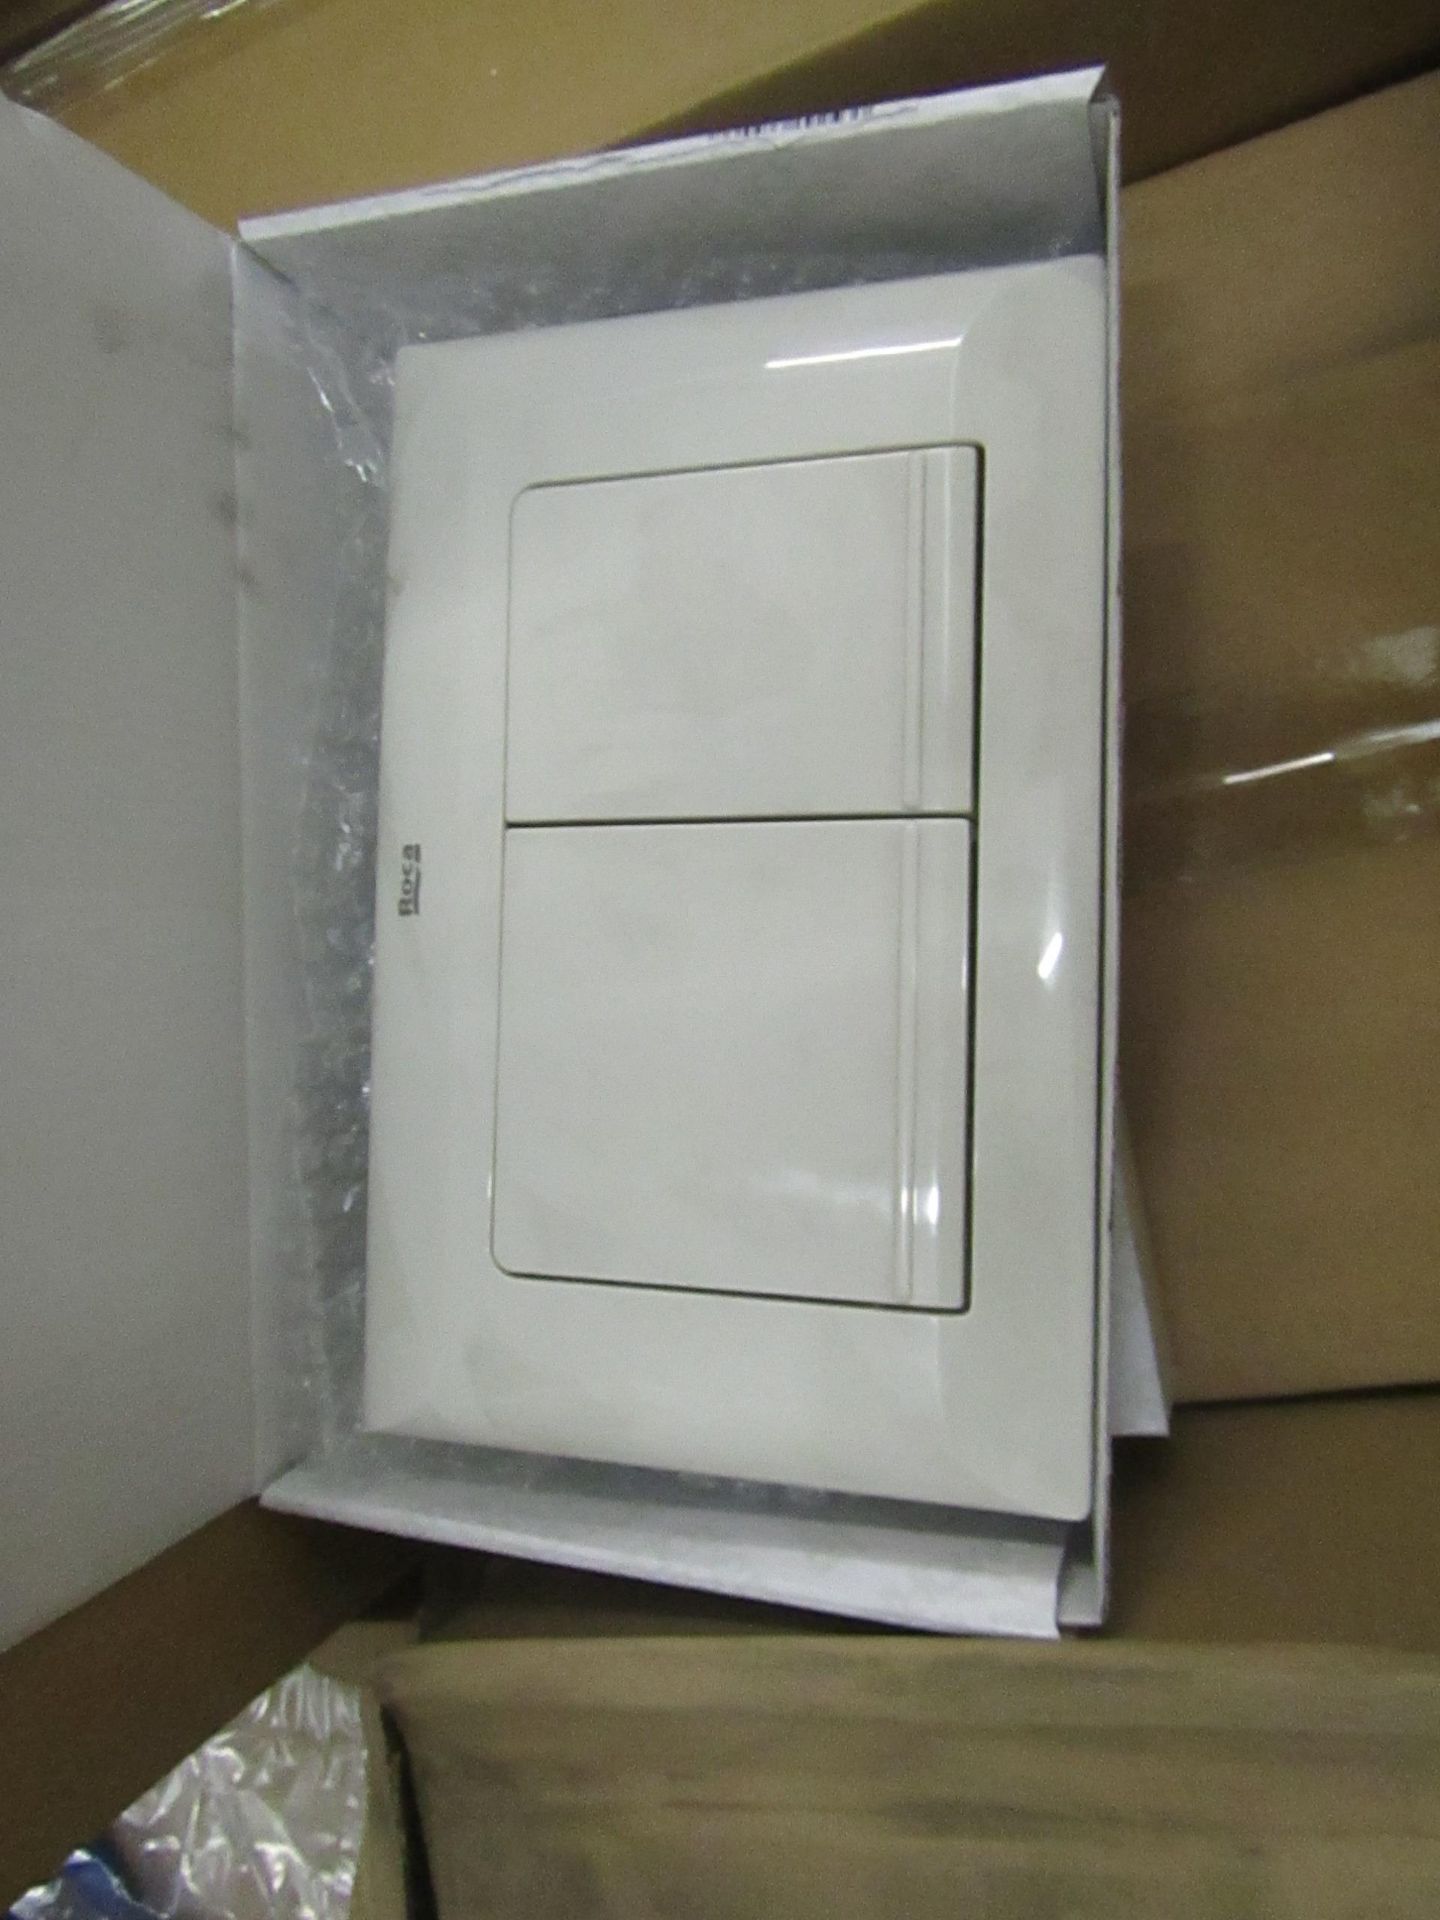 Box of 10x Roca L1 White Toilet flush plates, new and boxed, Total RRP for the lot is Circa £225